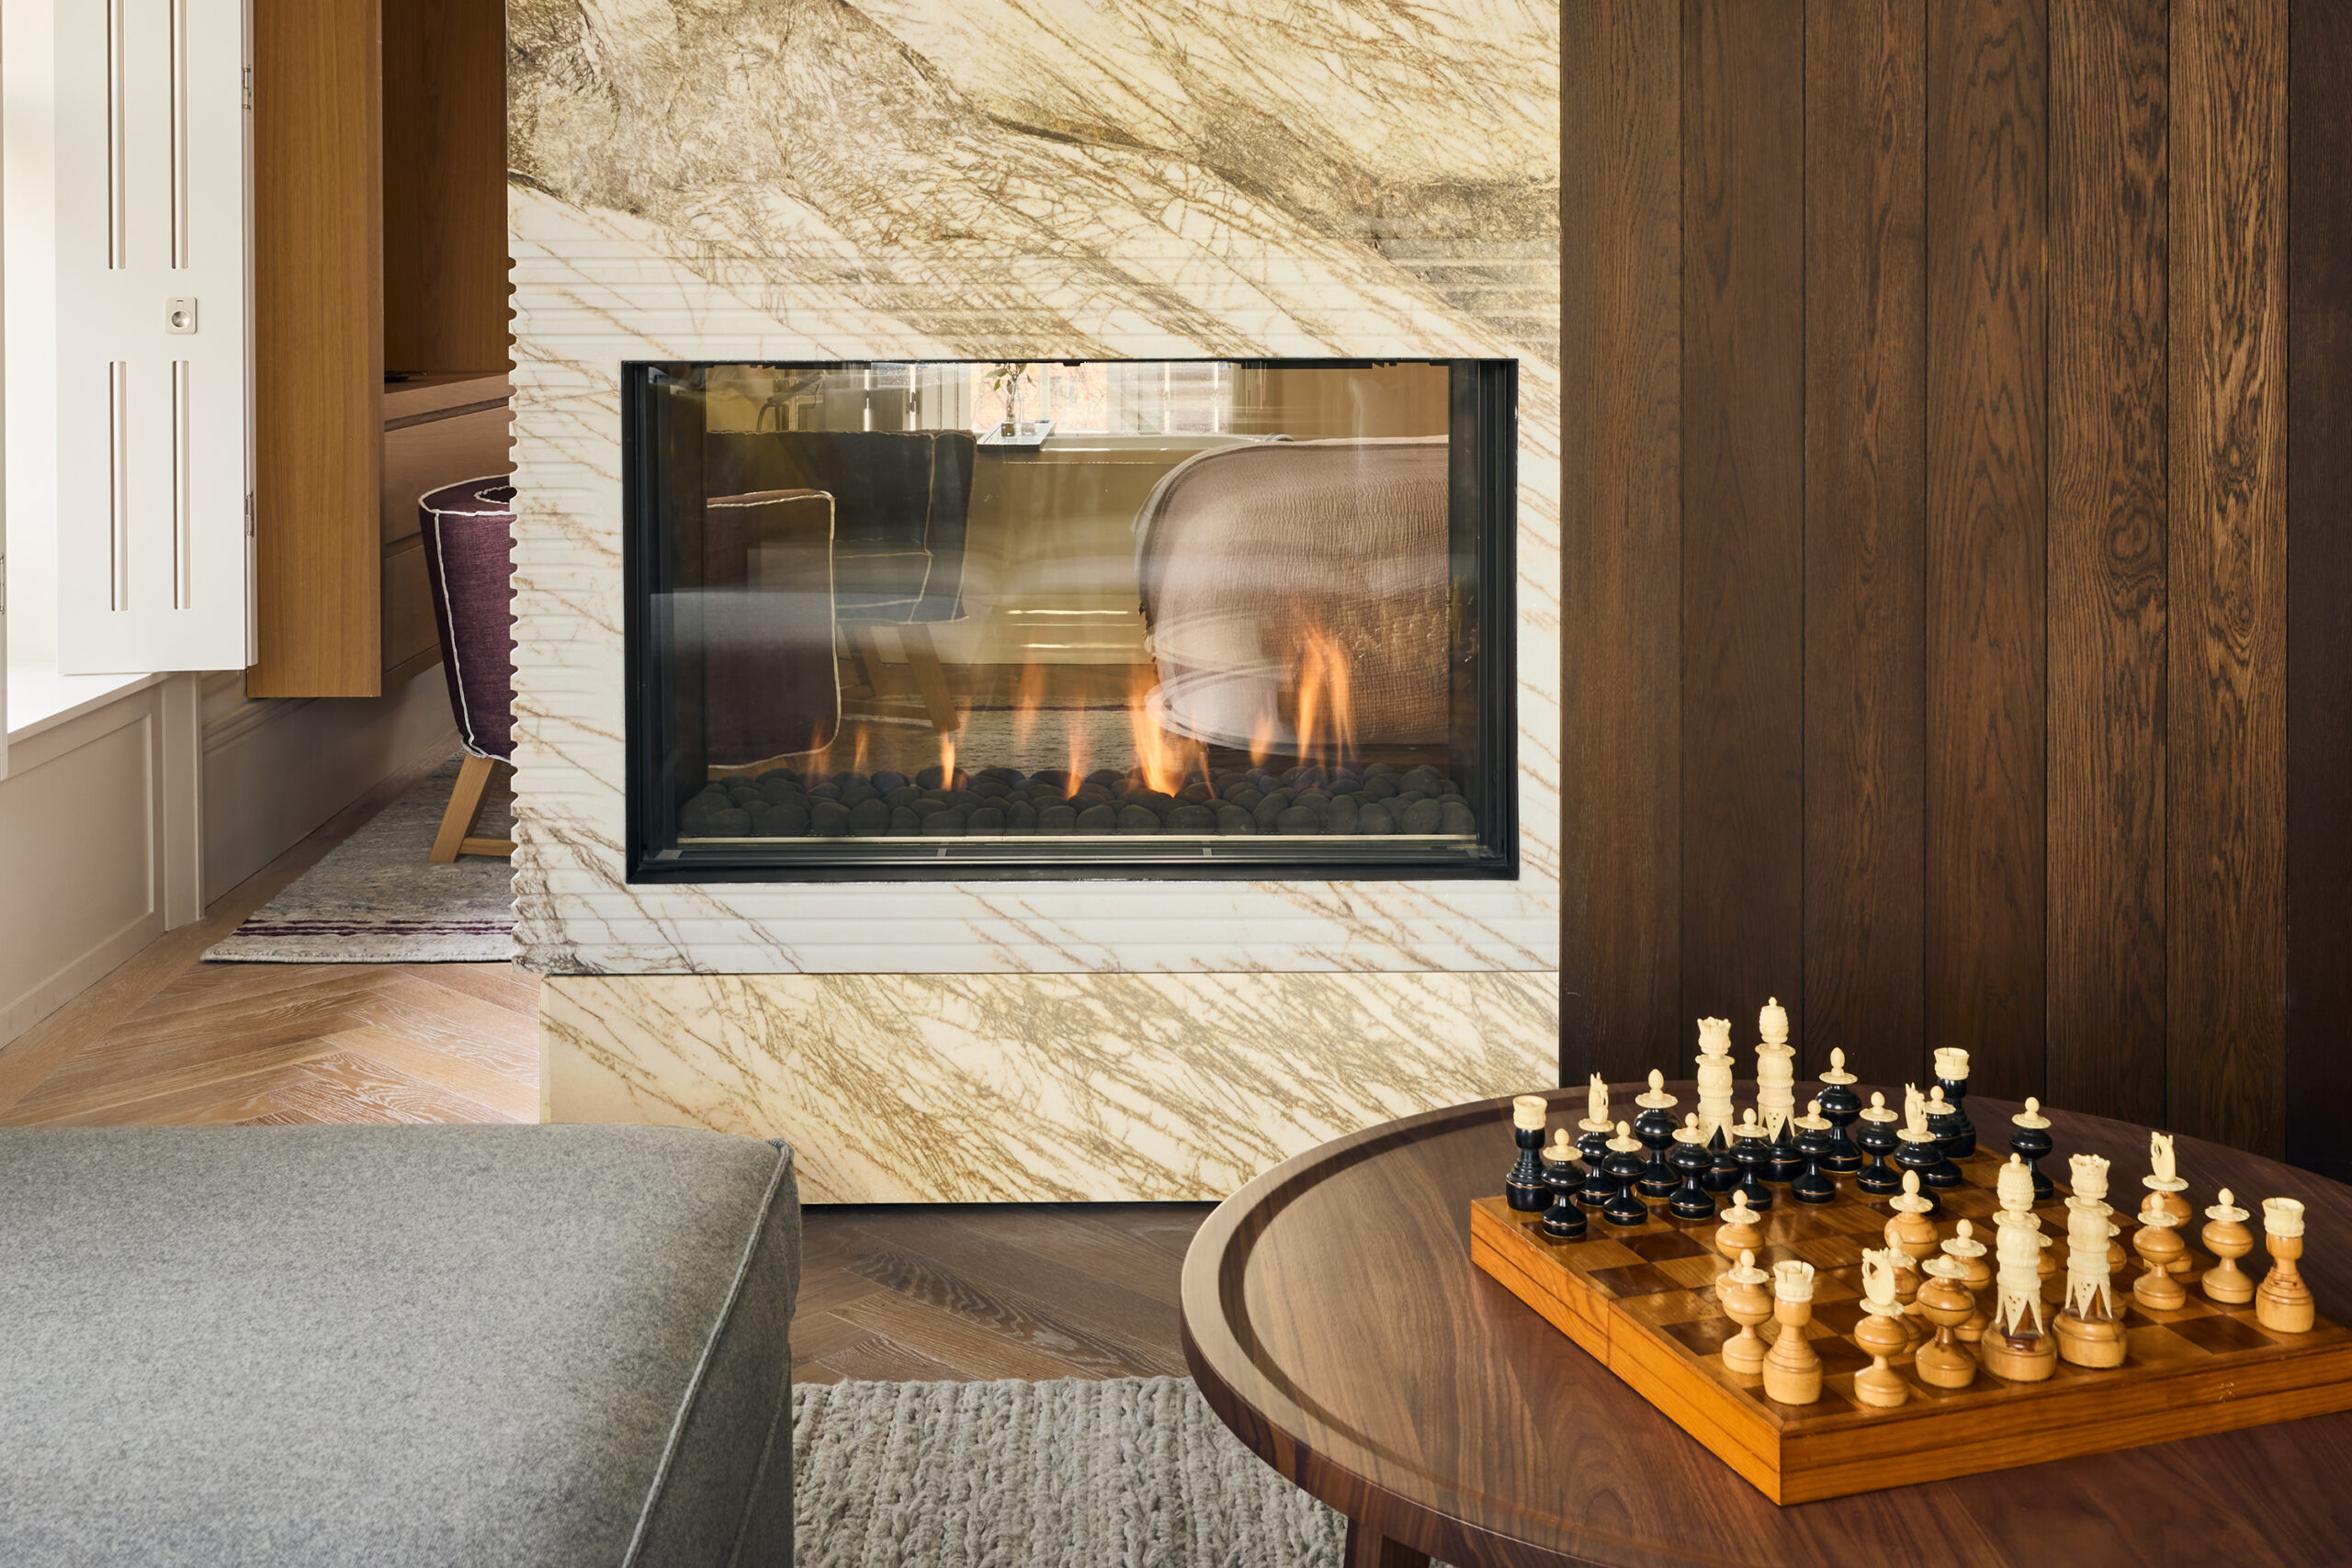 lit fireplace with coffee table and game of chess on it